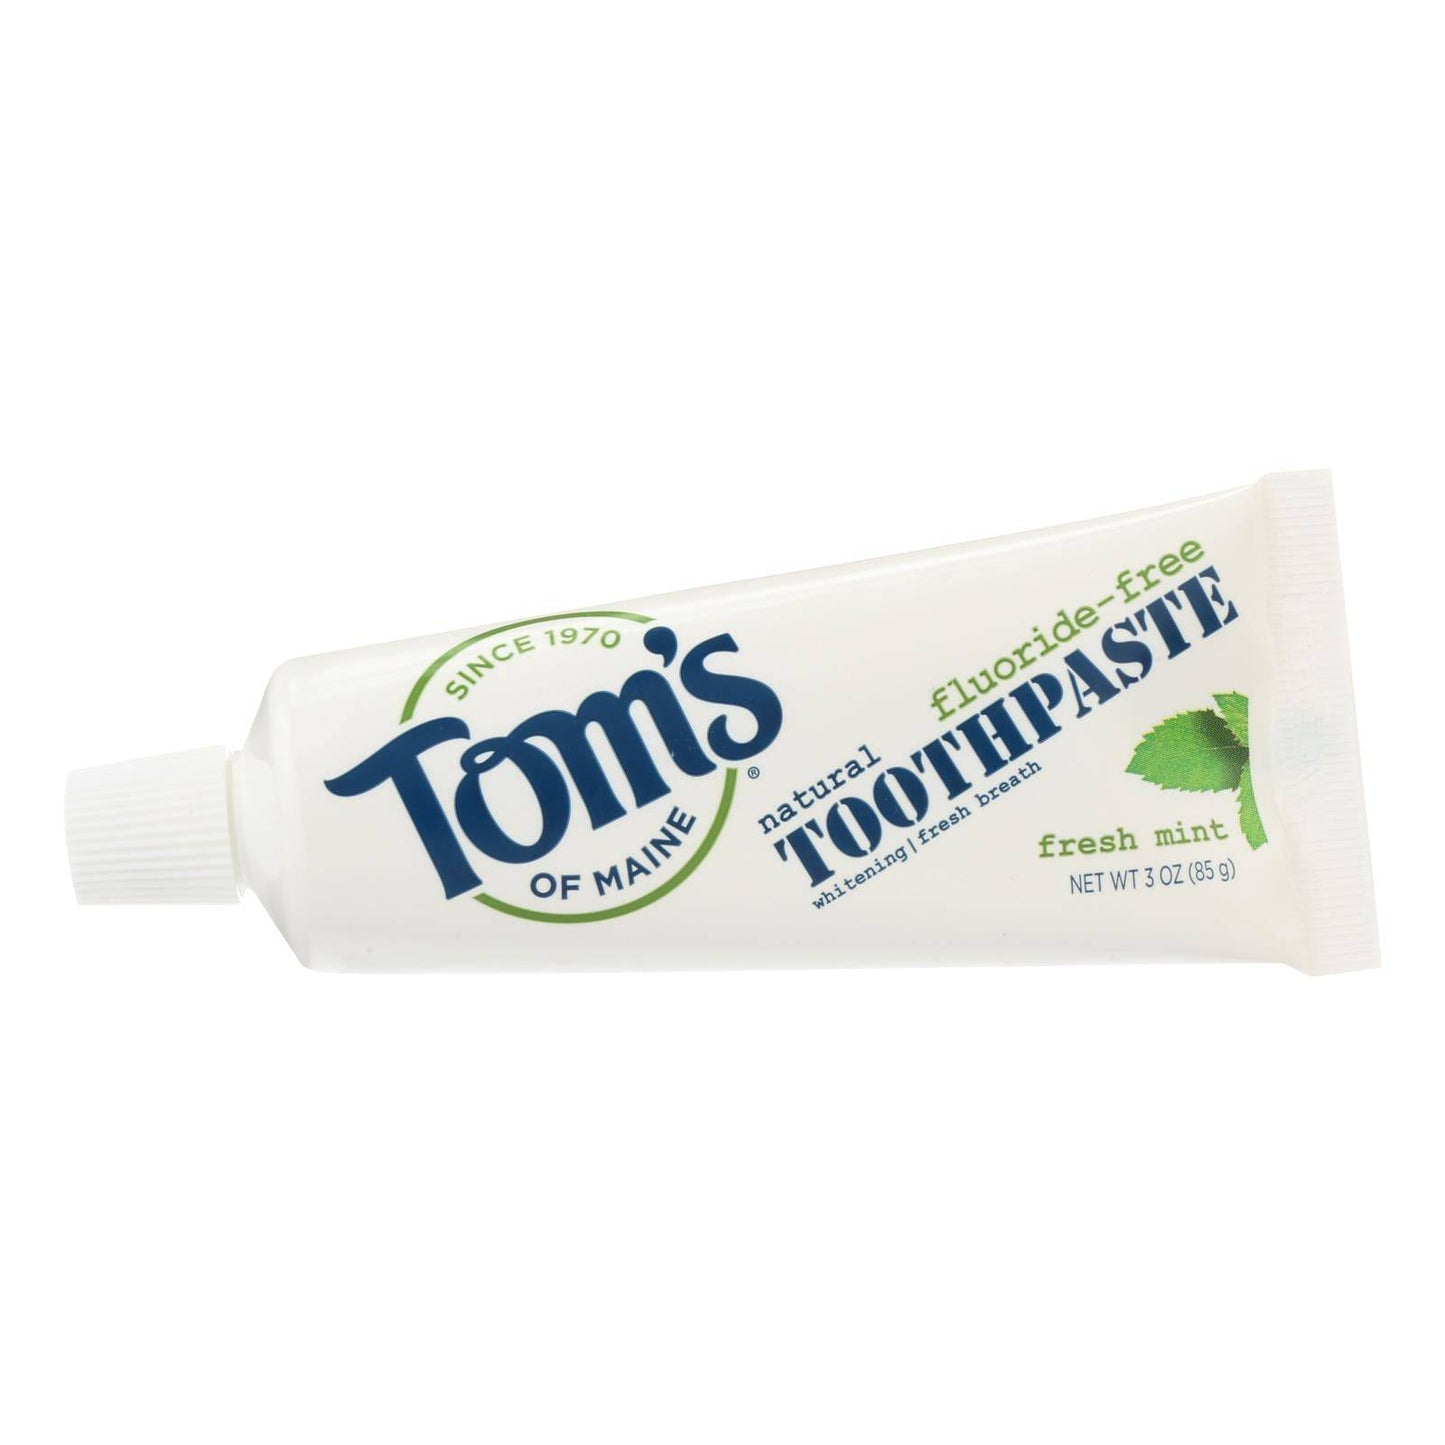 Tom's Of Maine Travel Natural Toothpaste - Fresh Mint Fluoride-free - Case Of 24 - 3 Oz. | OnlyNaturals.us